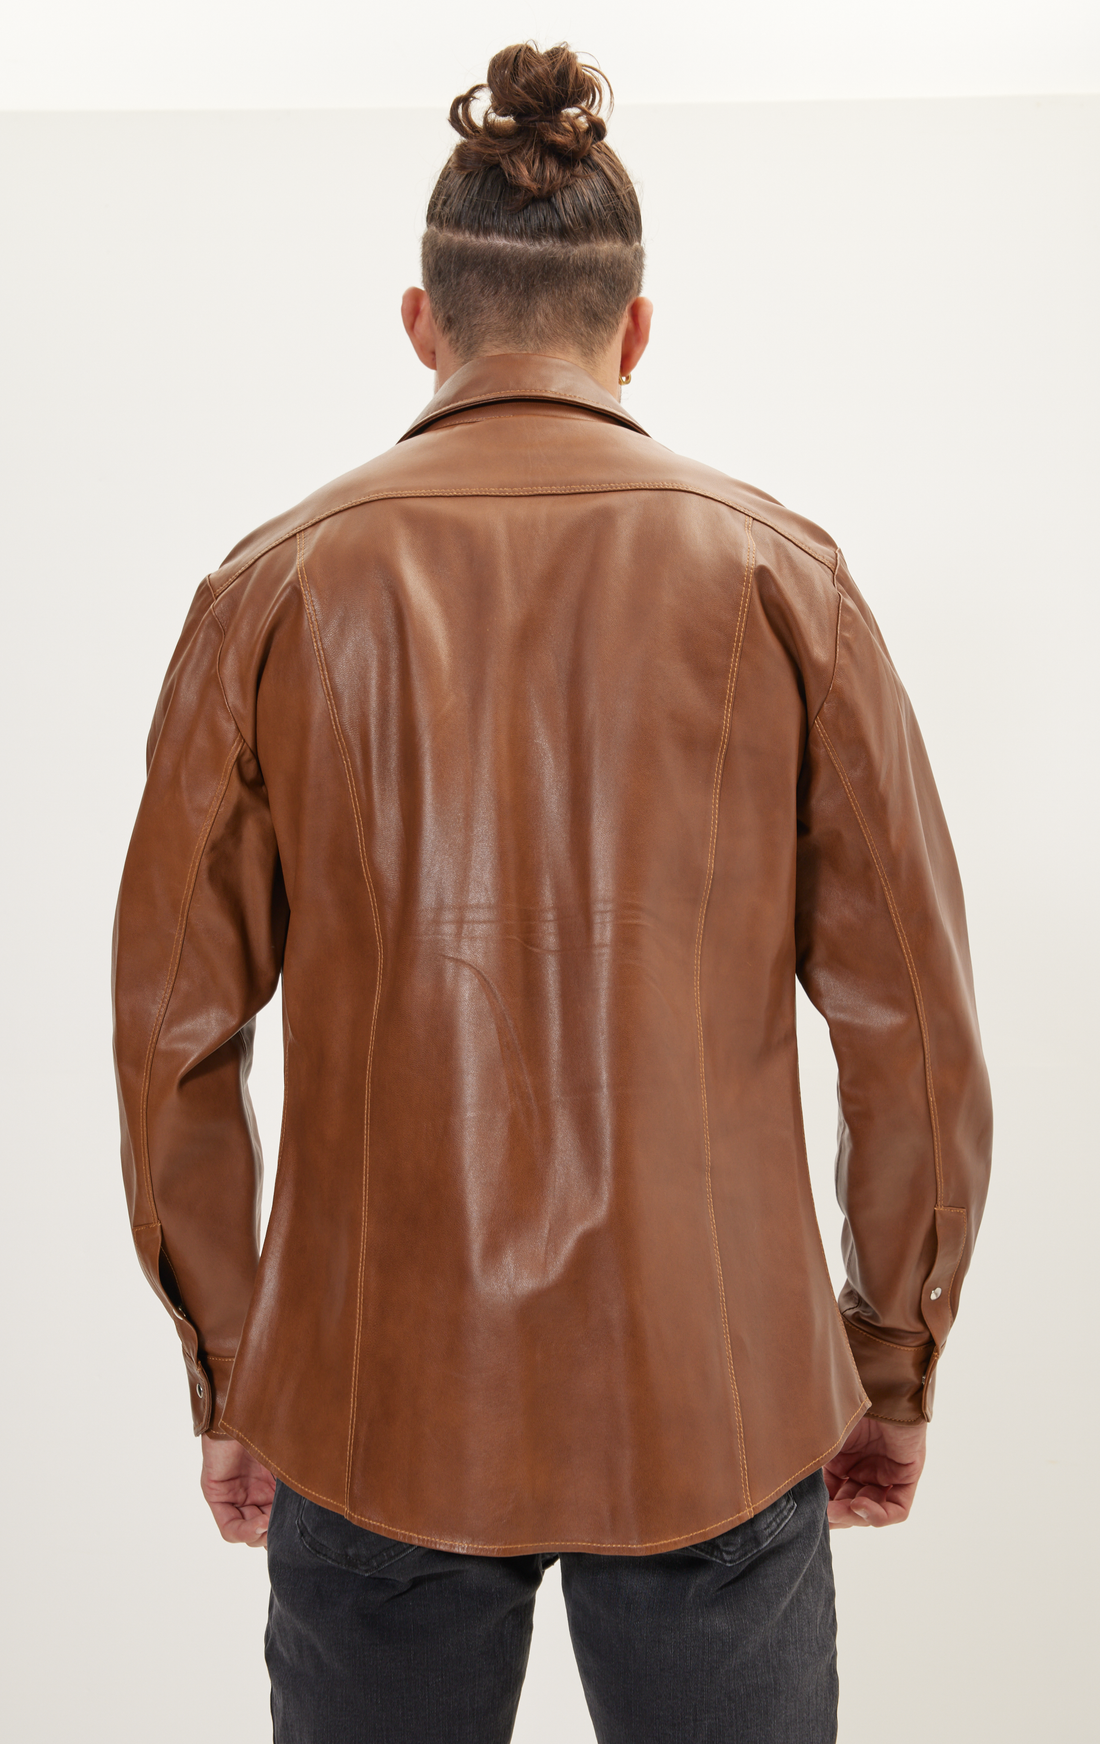 N° 4725Z GENUINE LEATHER SHIRT WITH ZIPPER CLOSURE - BROWN